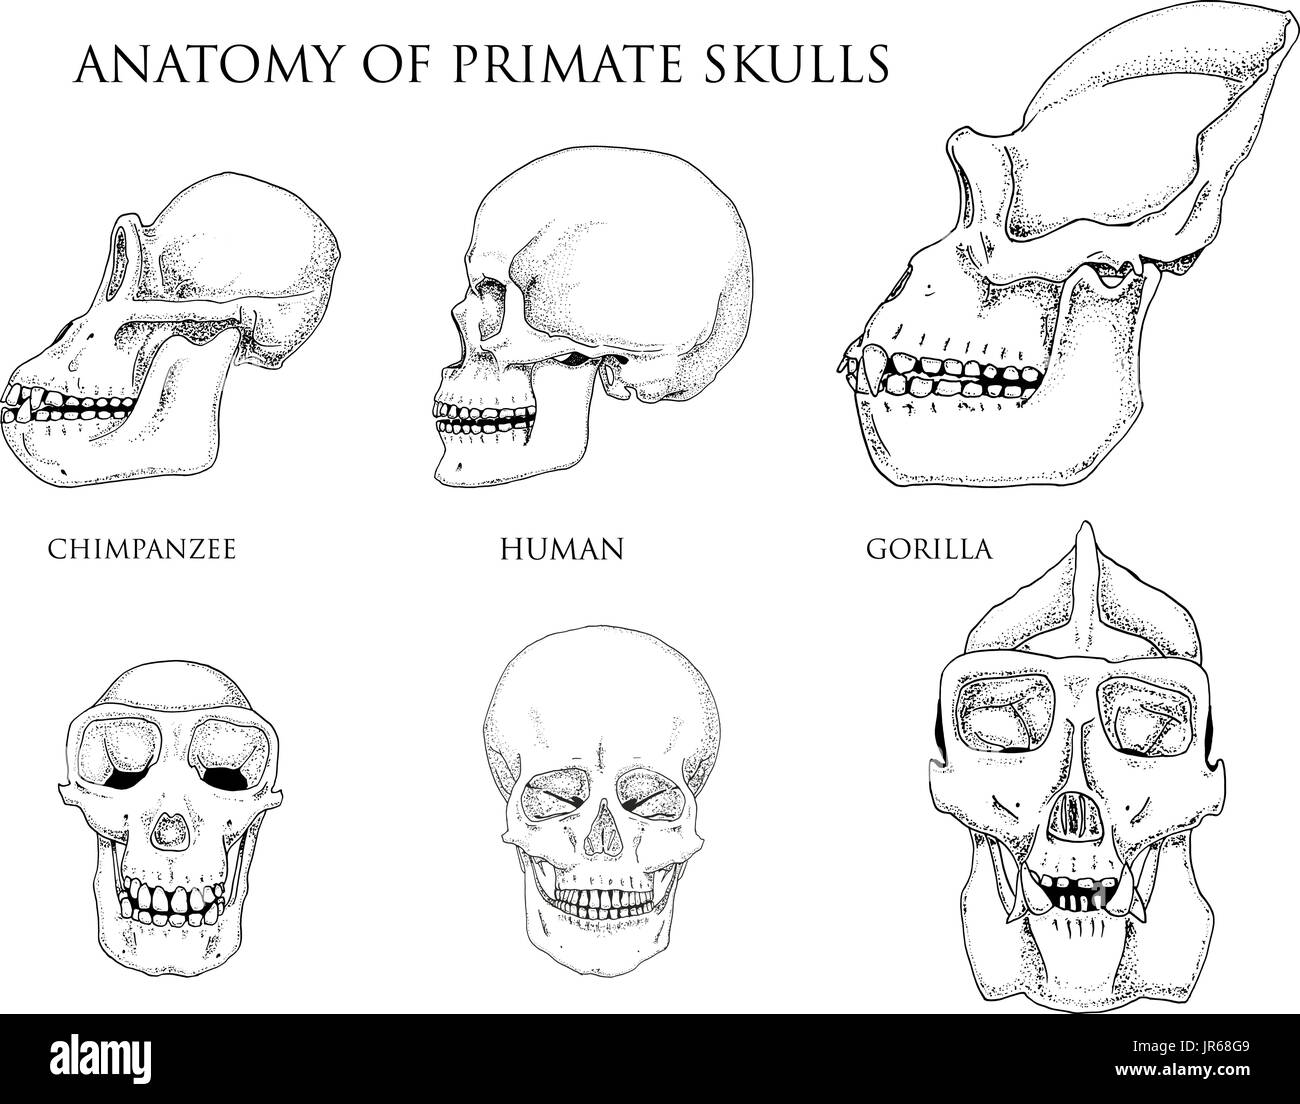 Human and chimpanzee, gorilla. biology and anatomy illustration. engraved hand drawn in old sketch and vintage style. monkey skull or skeleton or bones silhouette. front view or face and profile. Stock Vector